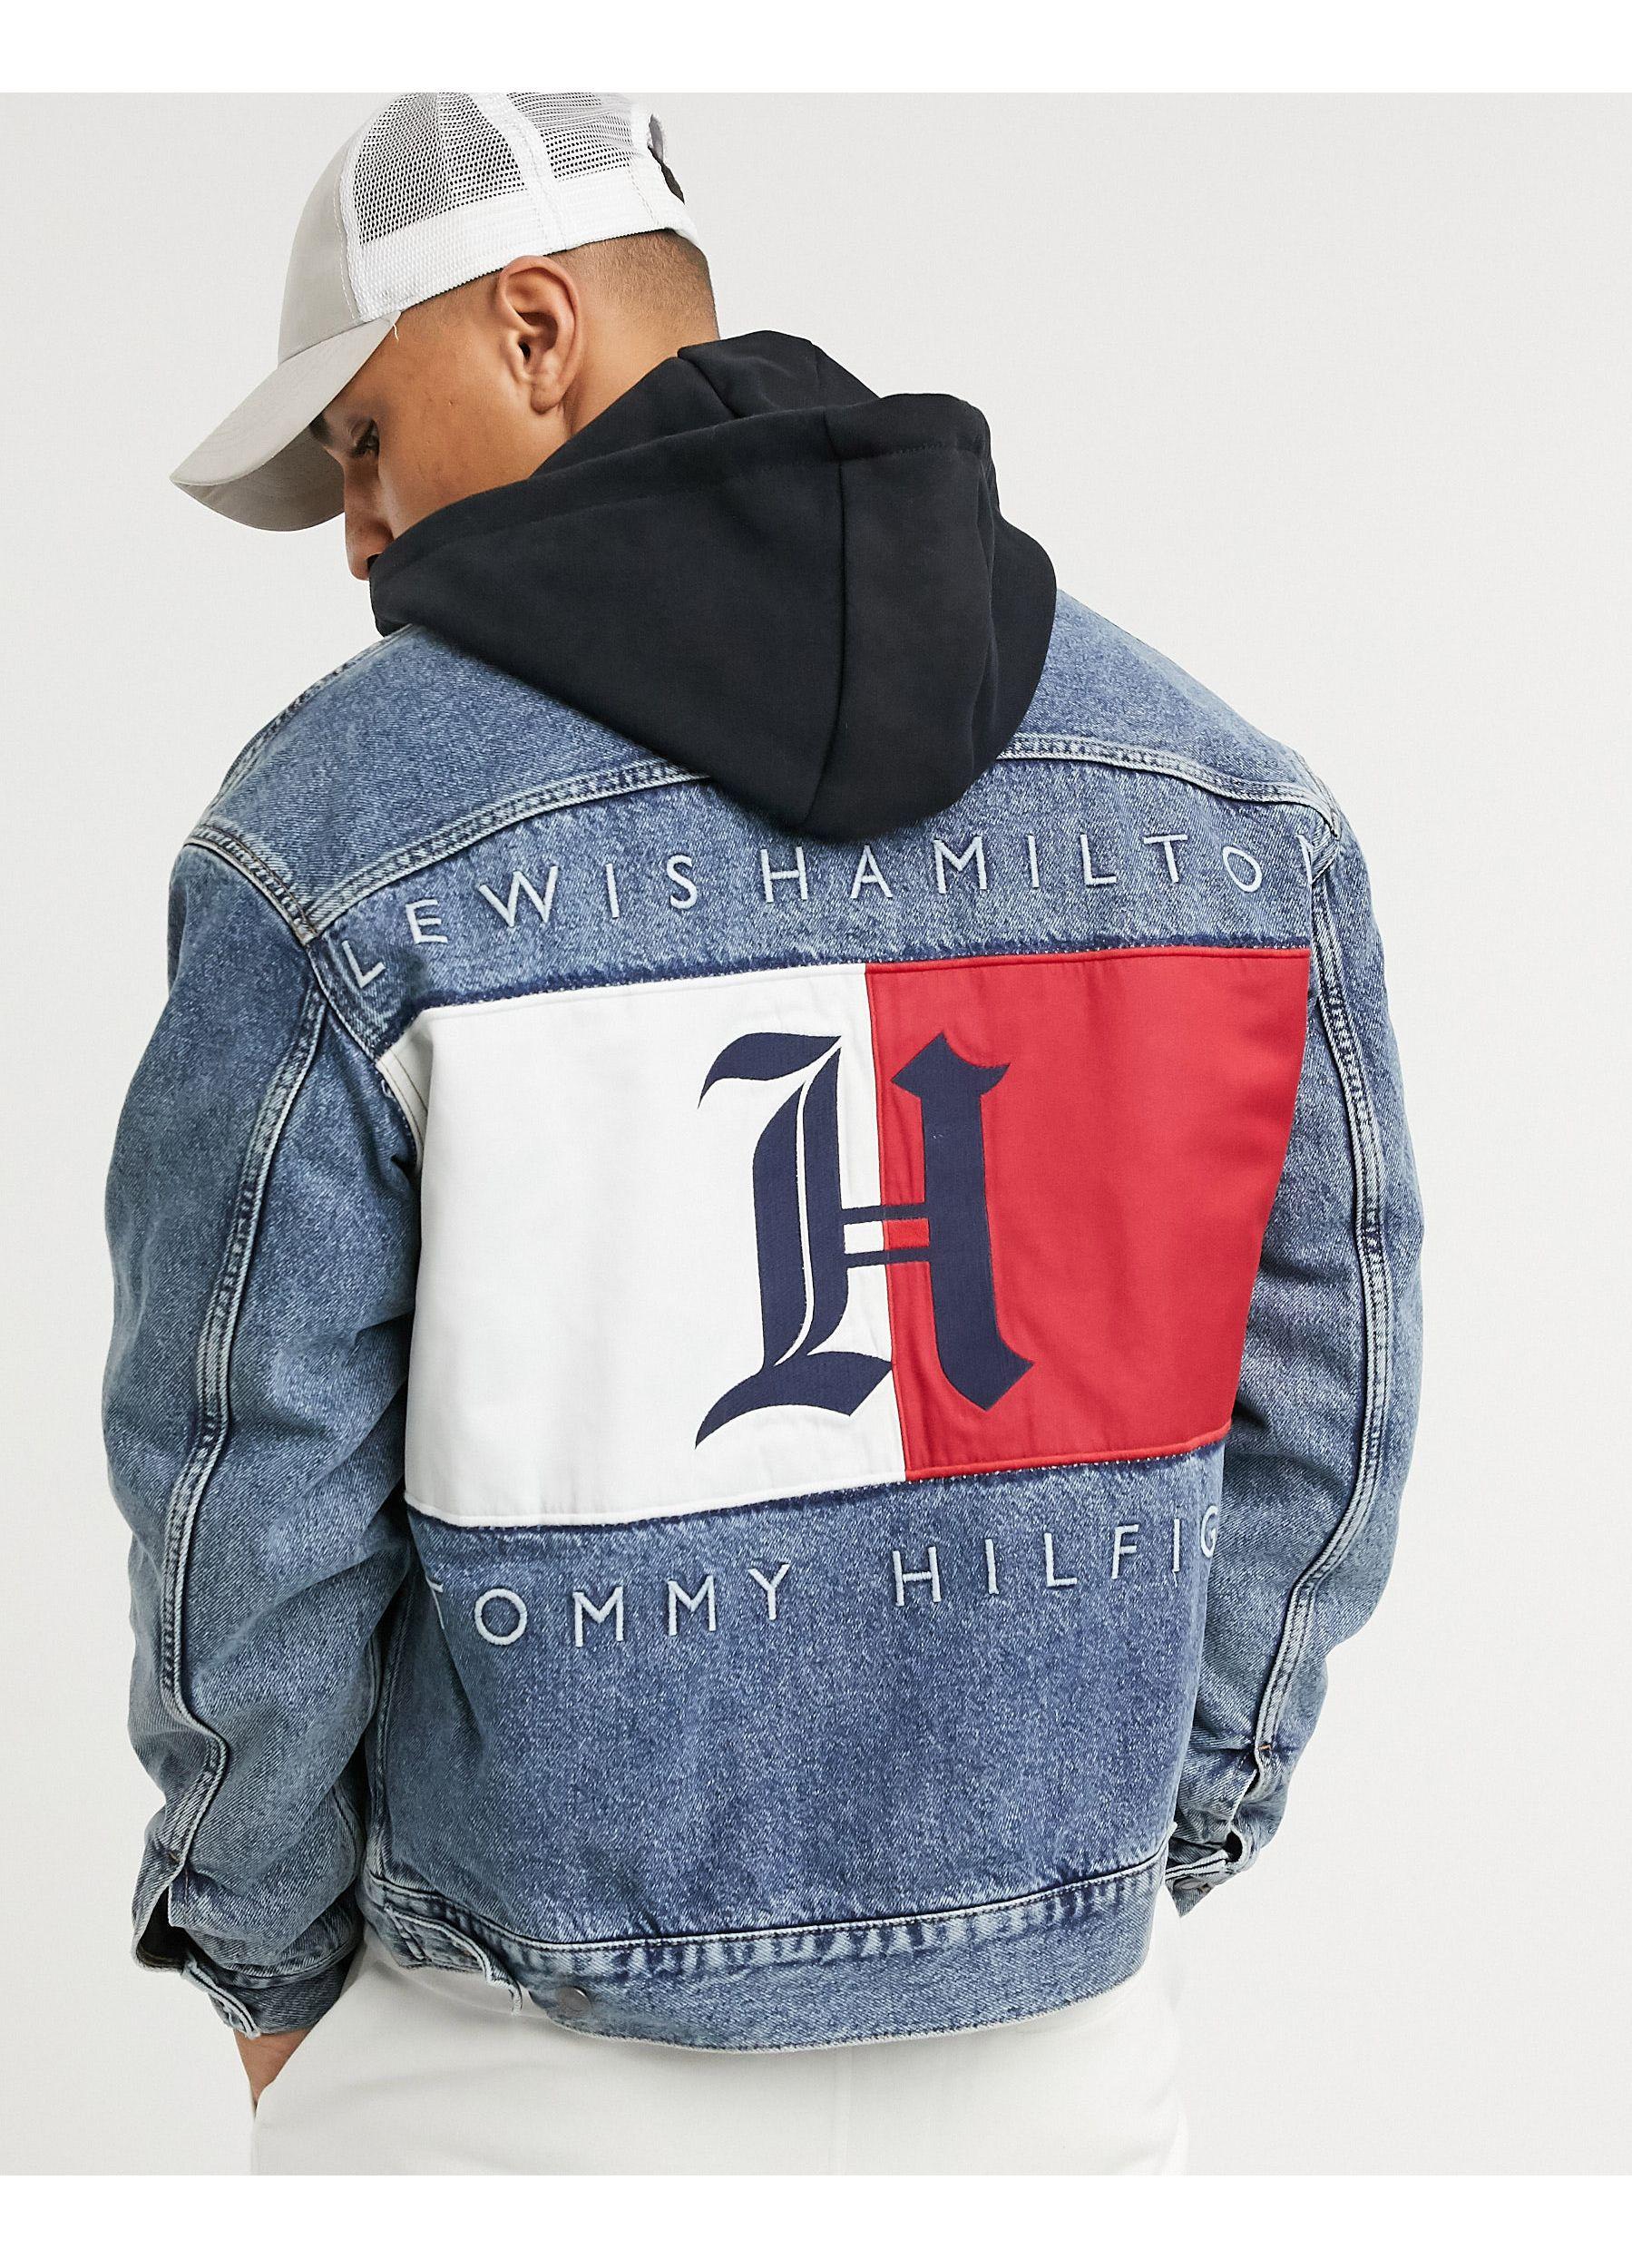 Tommy Hilfiger And Lewis Hamilton Buy Outlet, 44% OFF | aarav.co